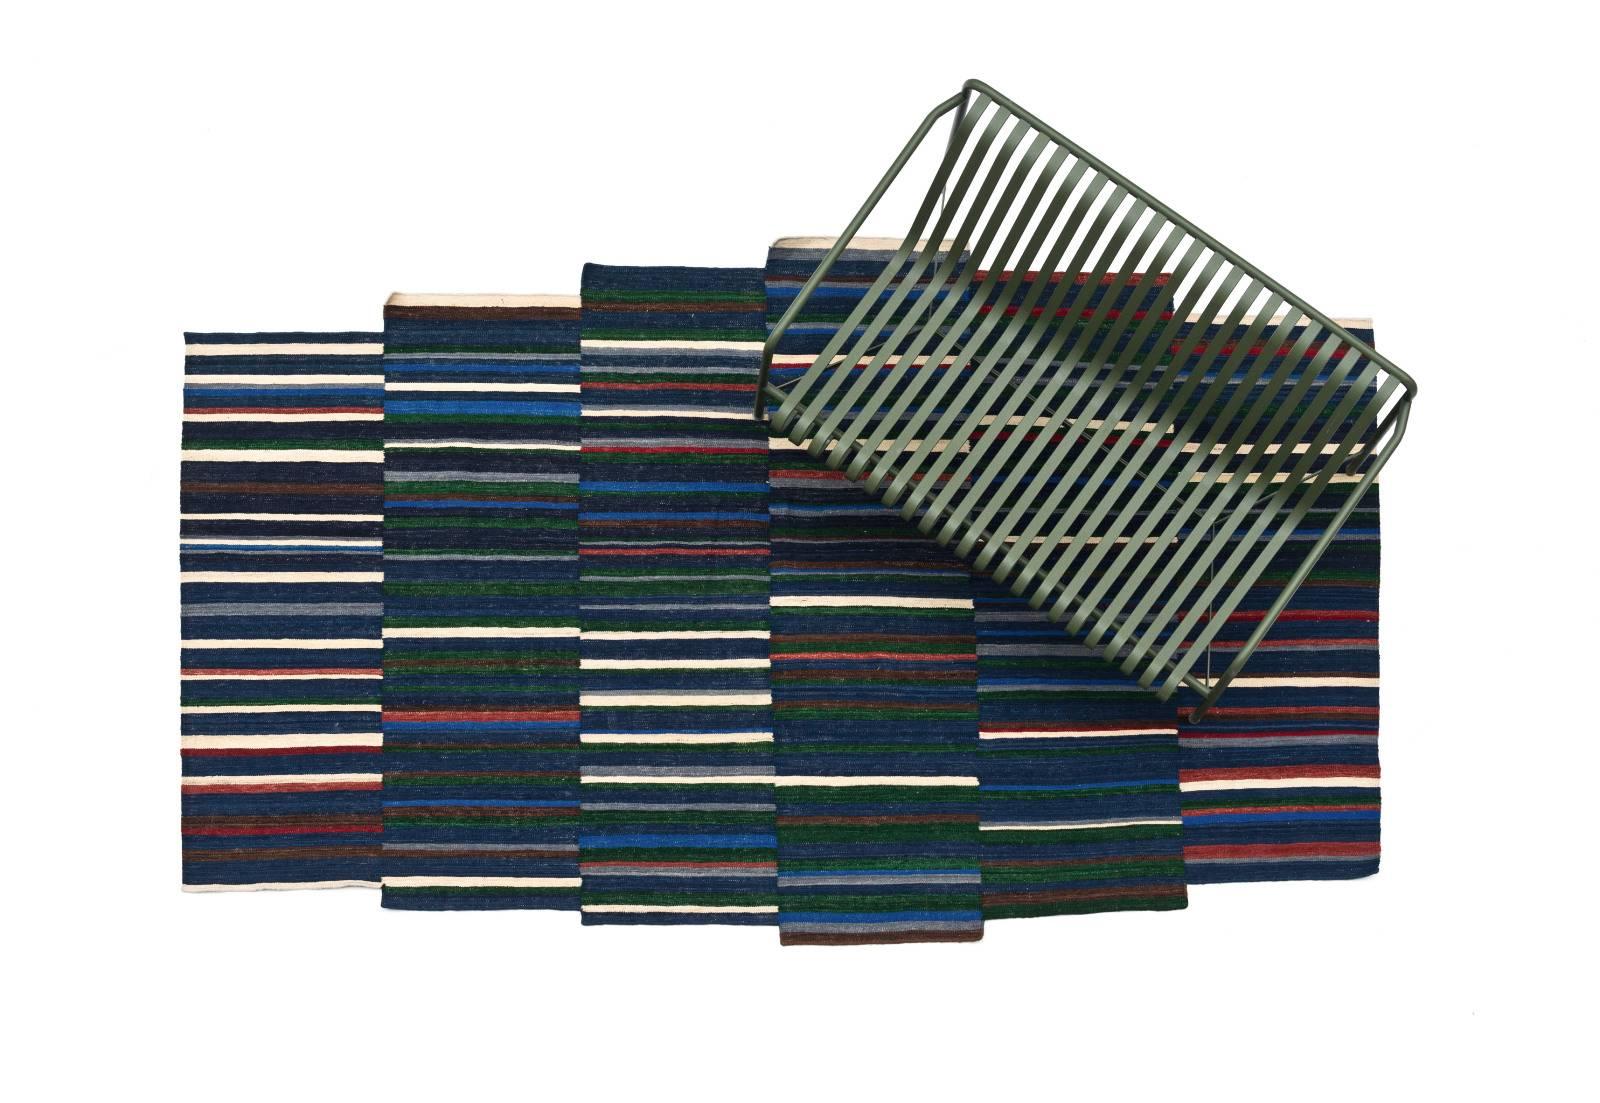 Pakistani Lattice 1 Hand-Loomed Afghan Wool Rug by Ronan & Erwan Bouroullec, Small For Sale